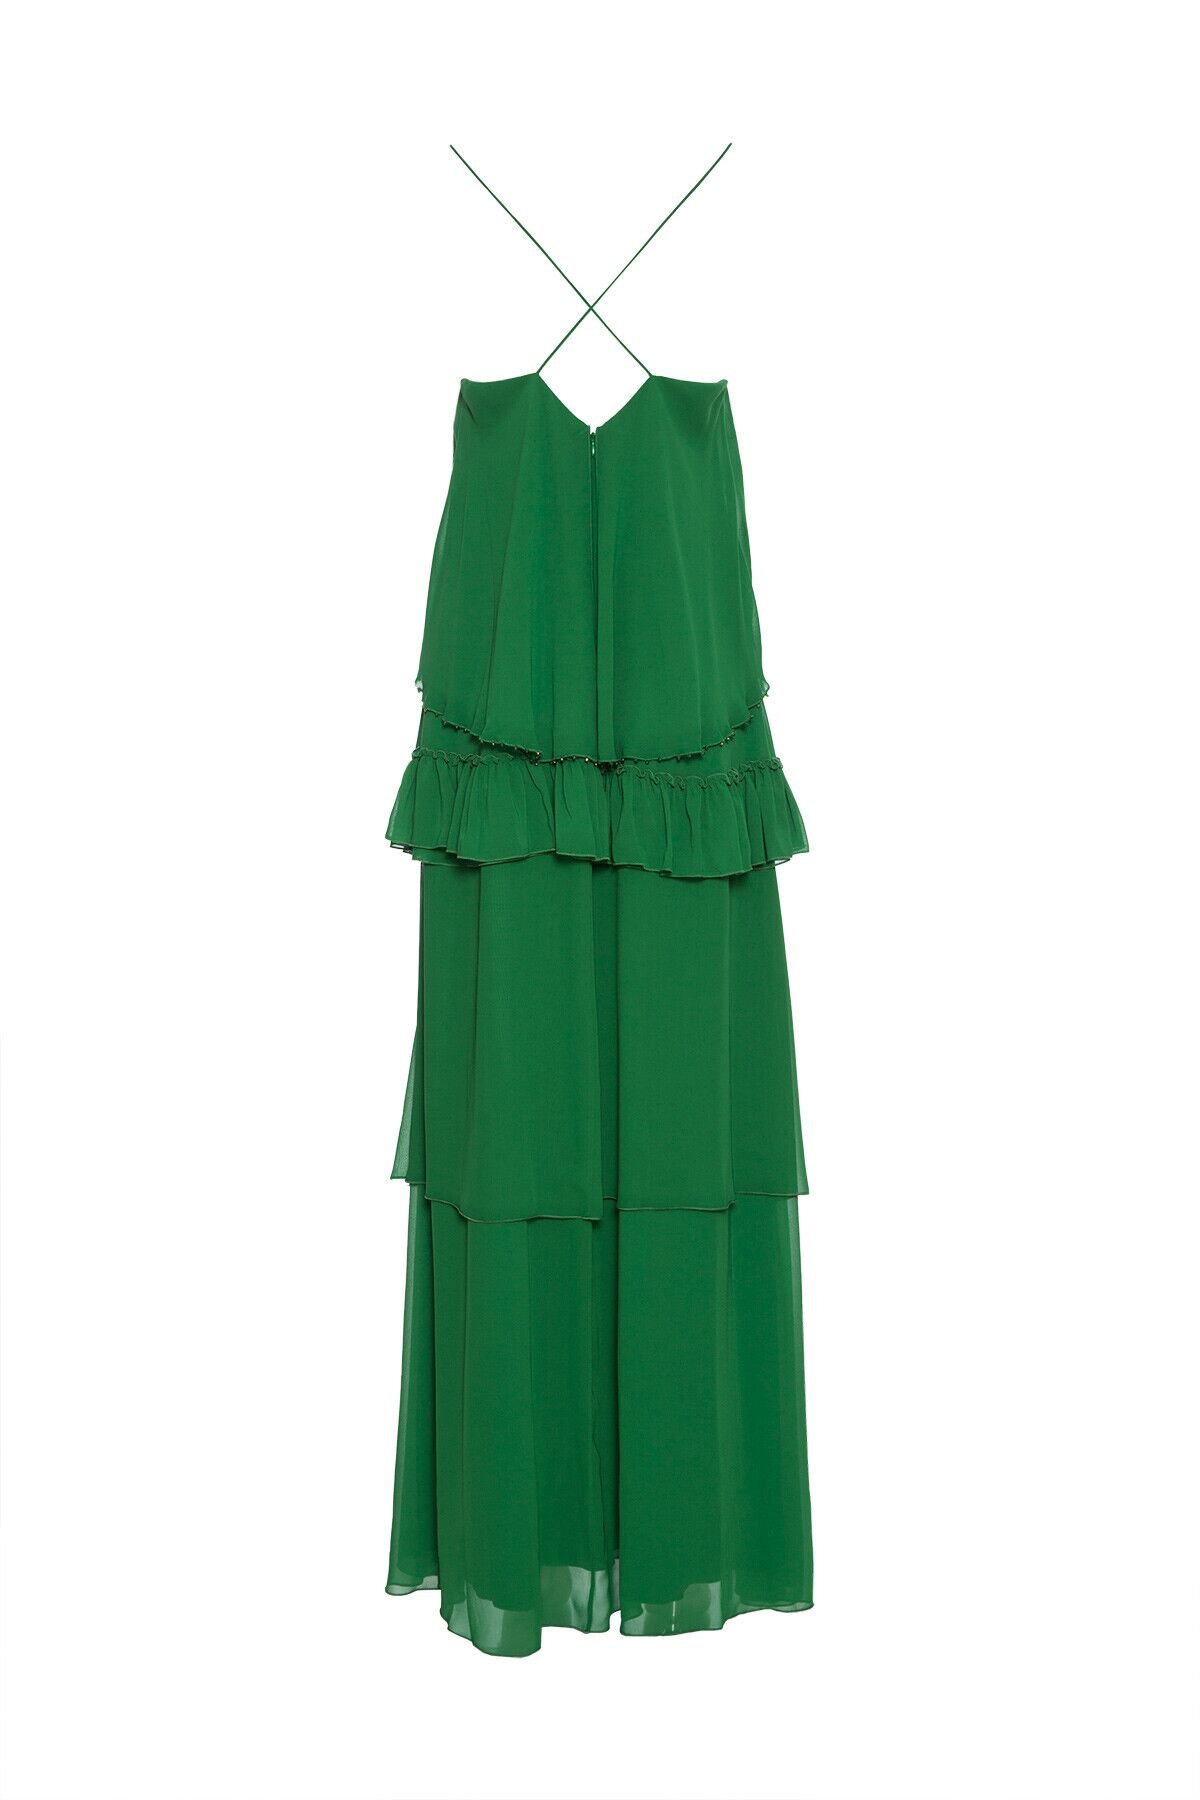 Frilly Rope Strap Green Dress